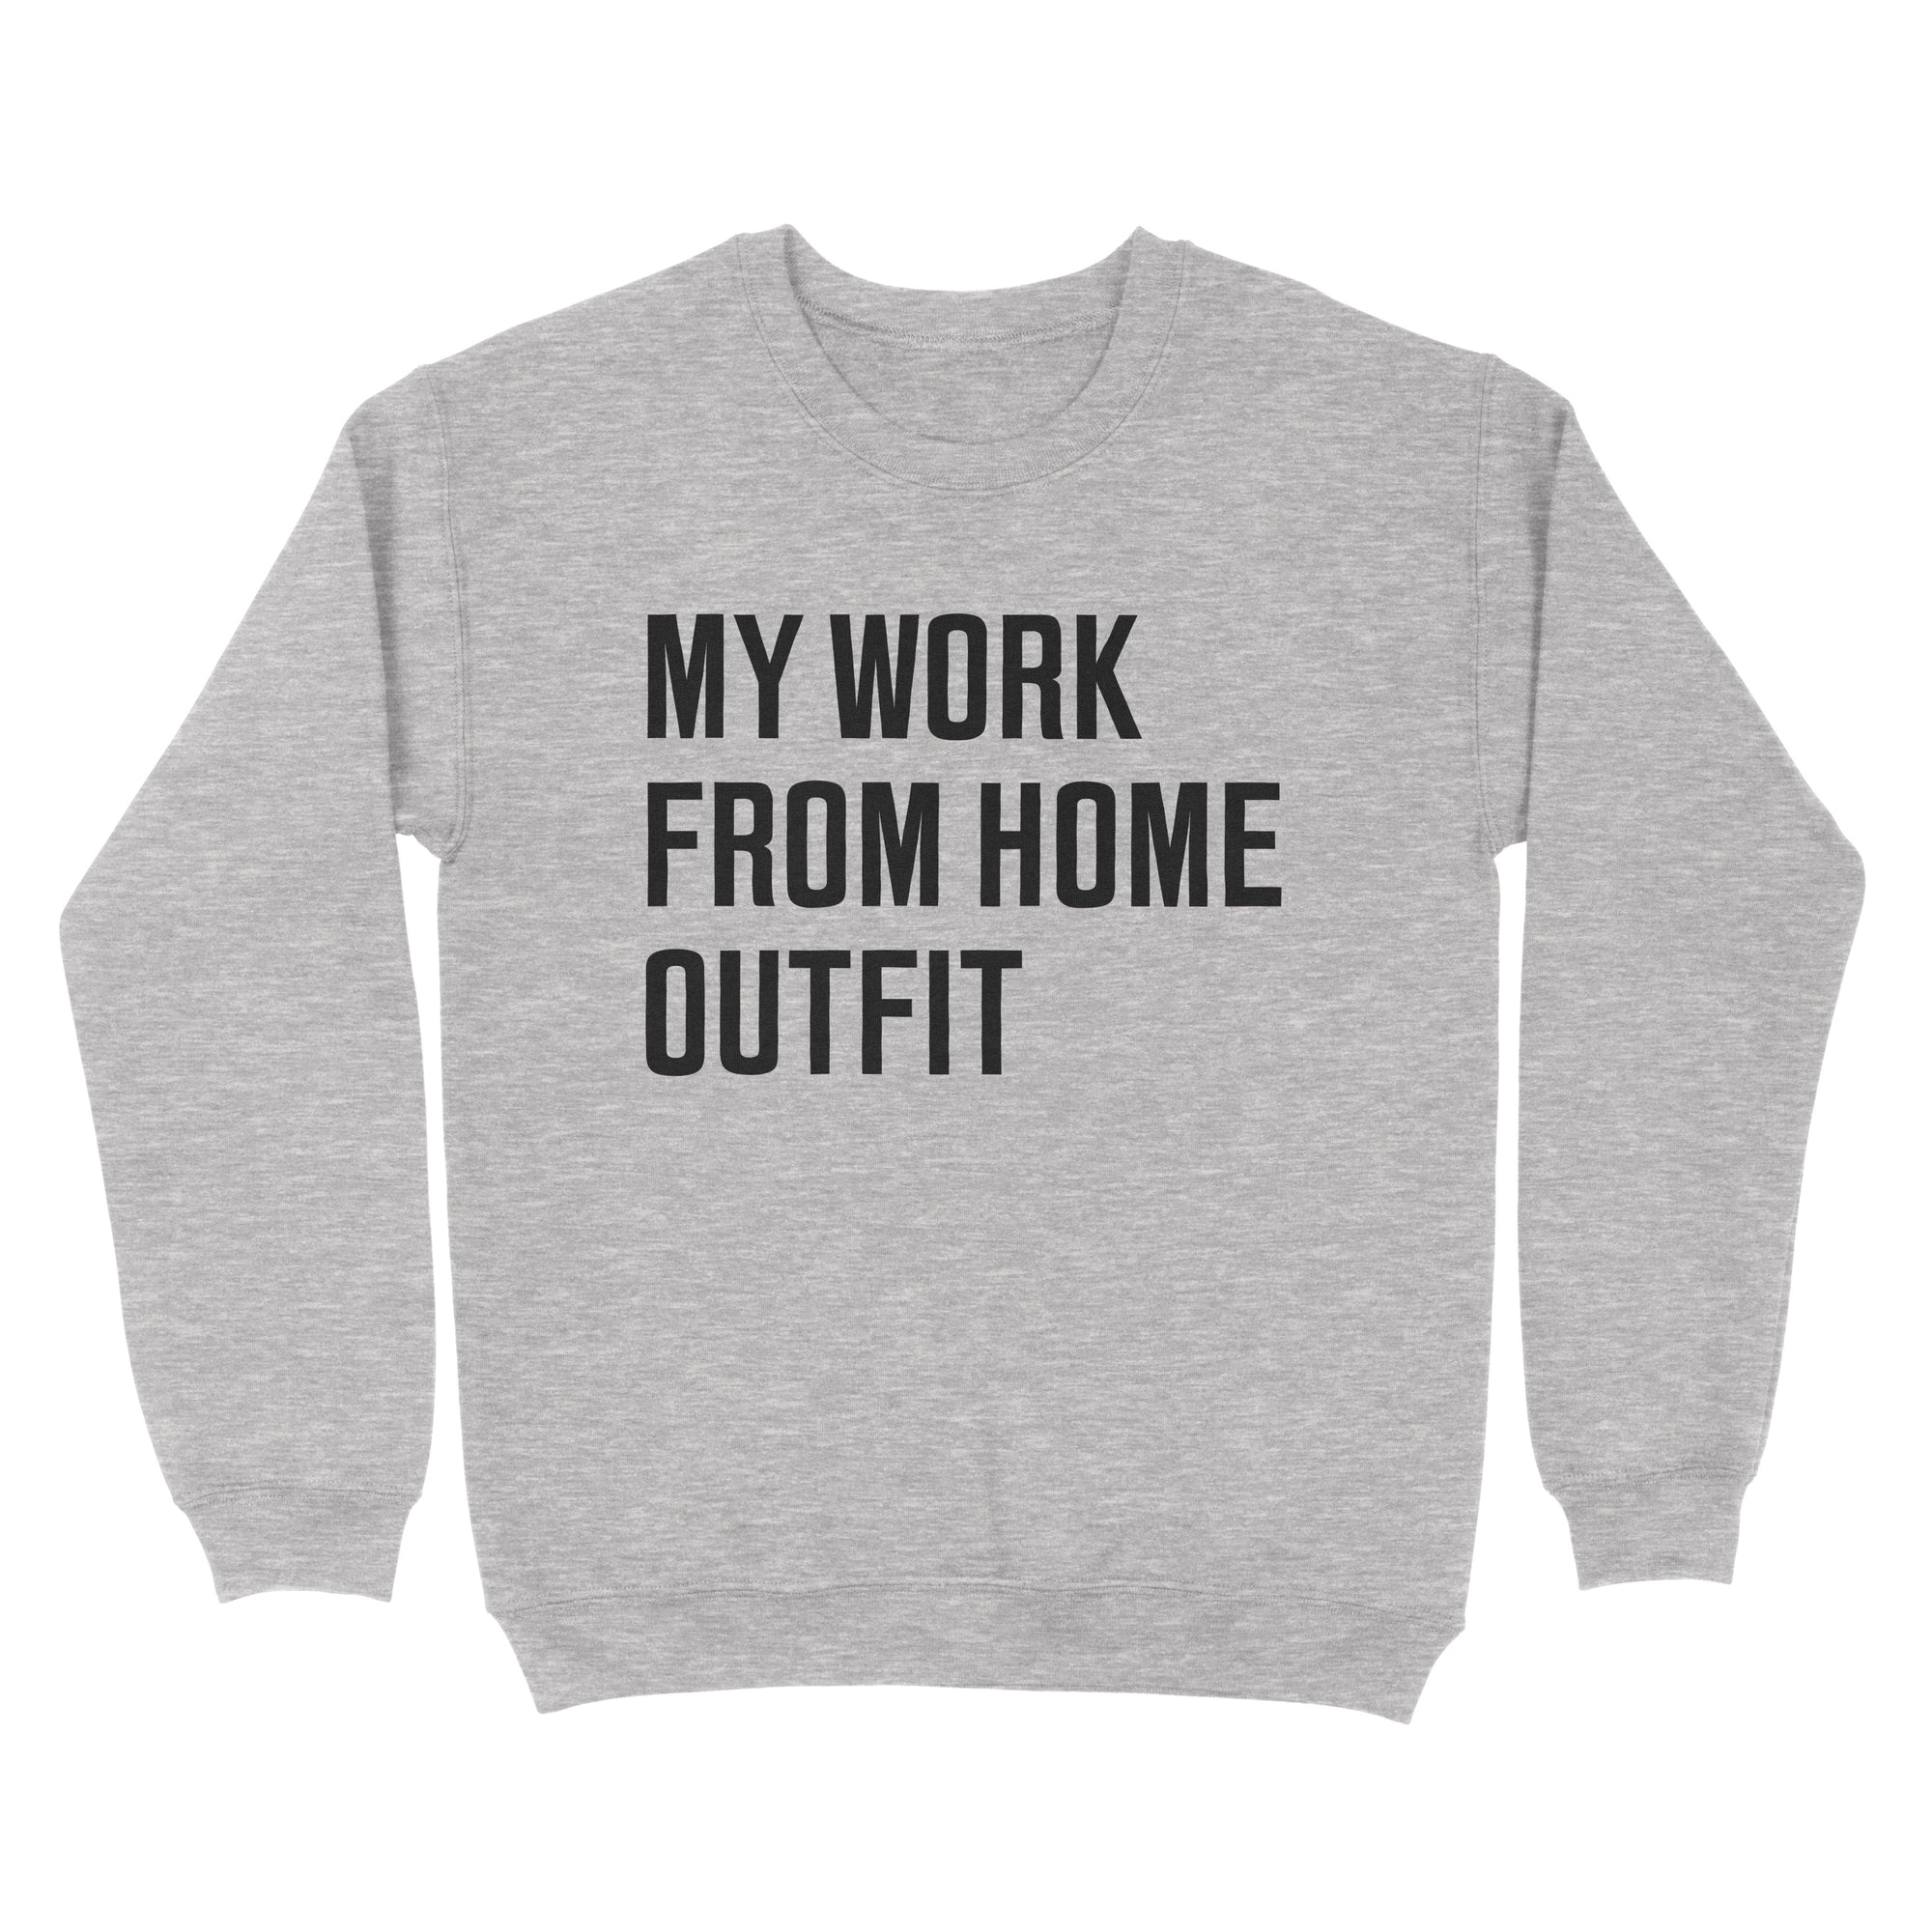 My Work From Home Outfit Sweatshirt - Twisted Gorilla